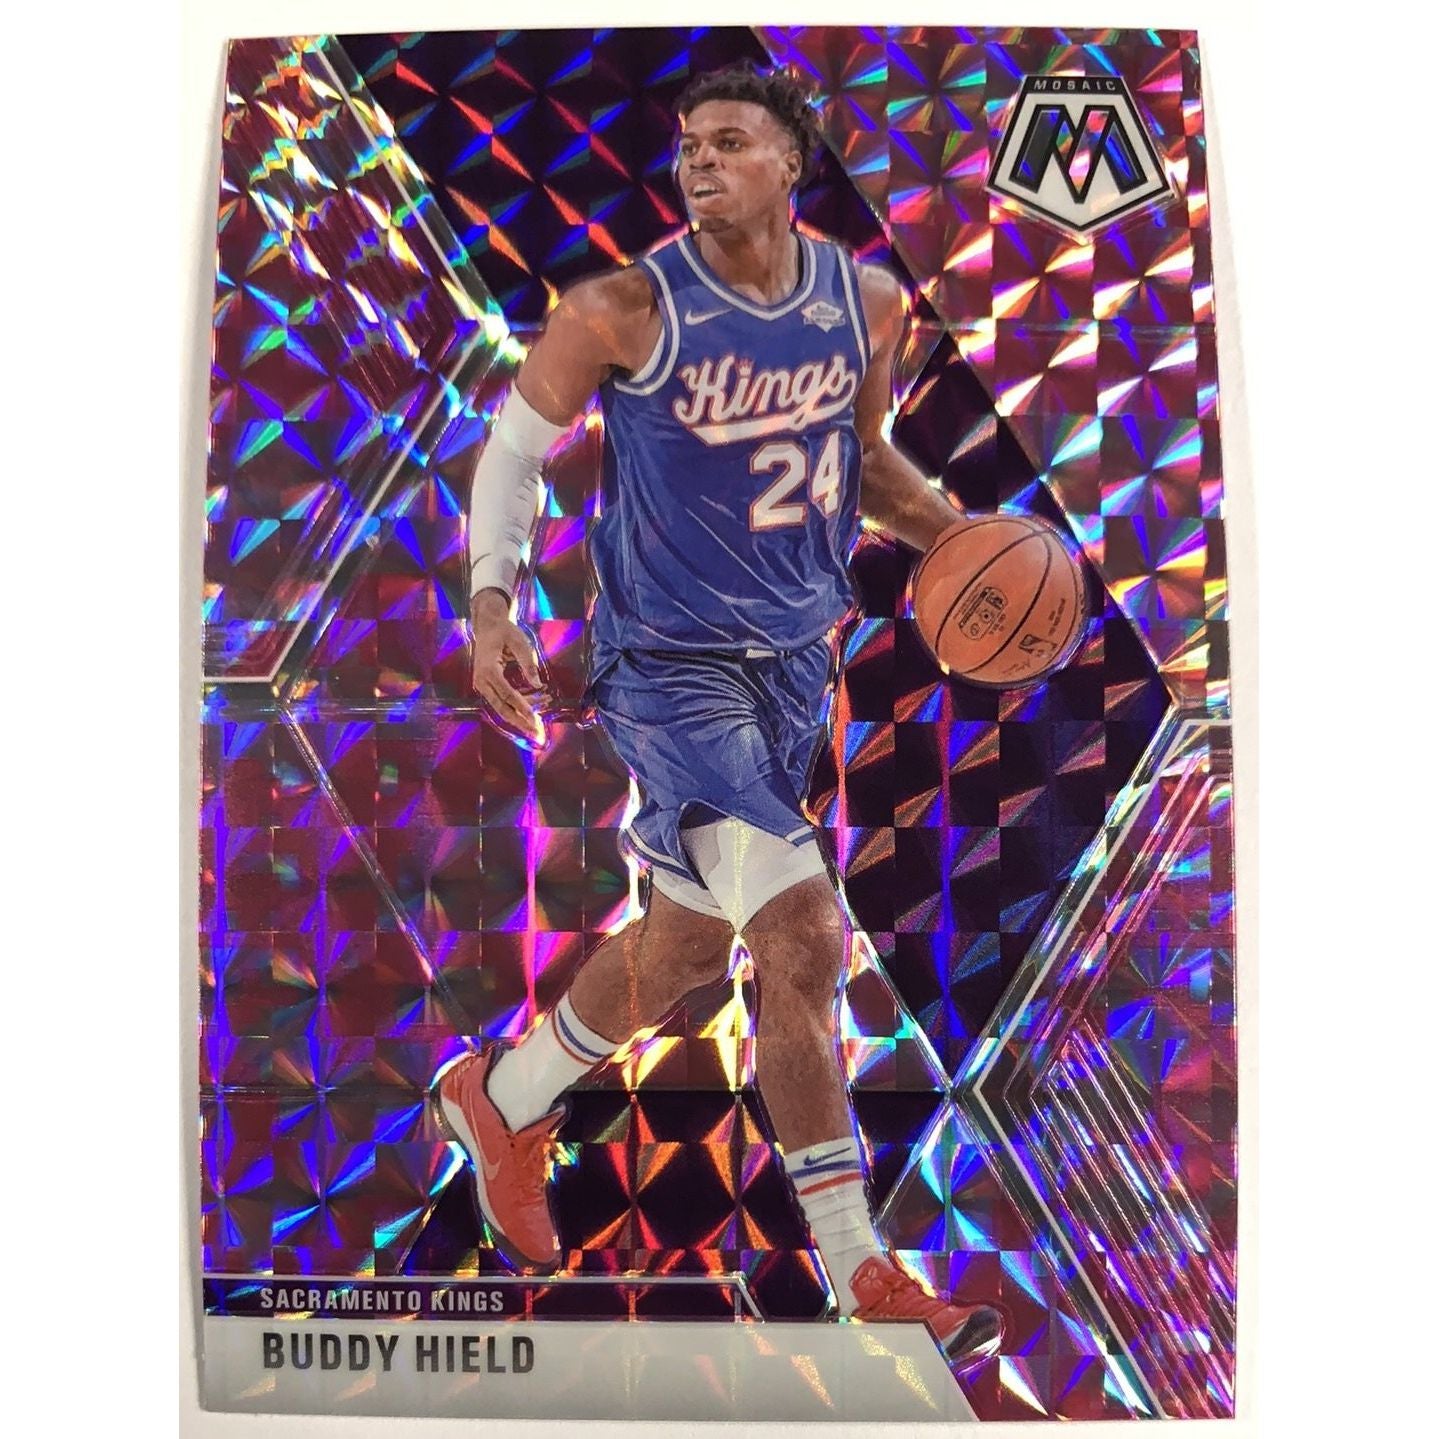  2019-20 Mosaic Buddy Hield Pink Prizm  Local Legends Cards & Collectibles